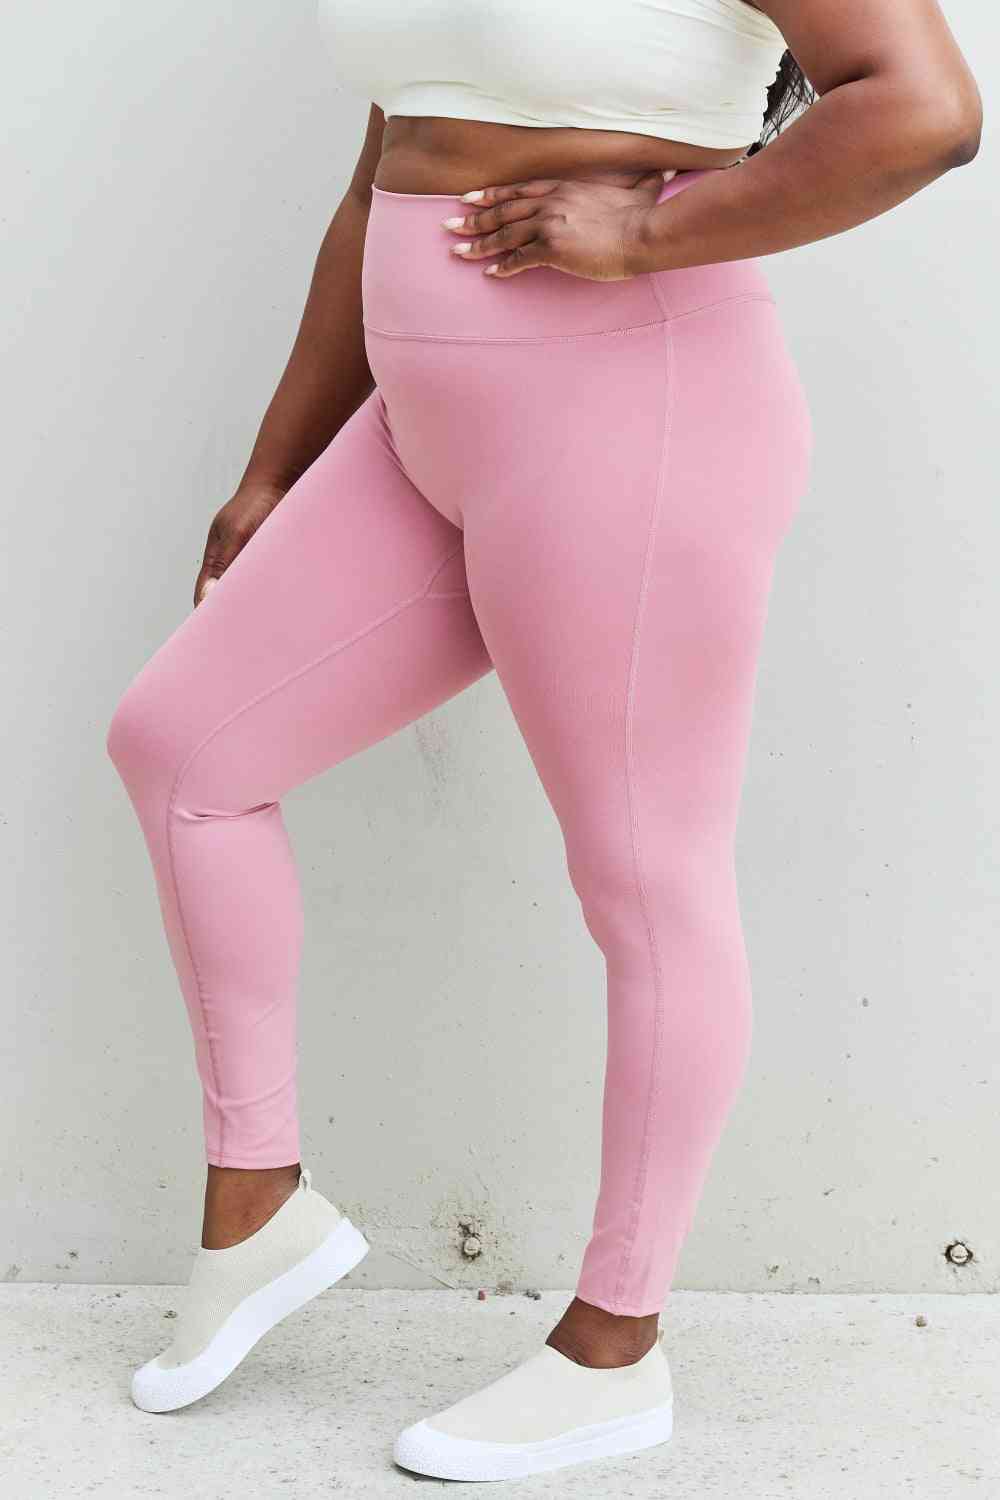 Fit For You High Waisted Active Leggings in Light Rose (S-3X)